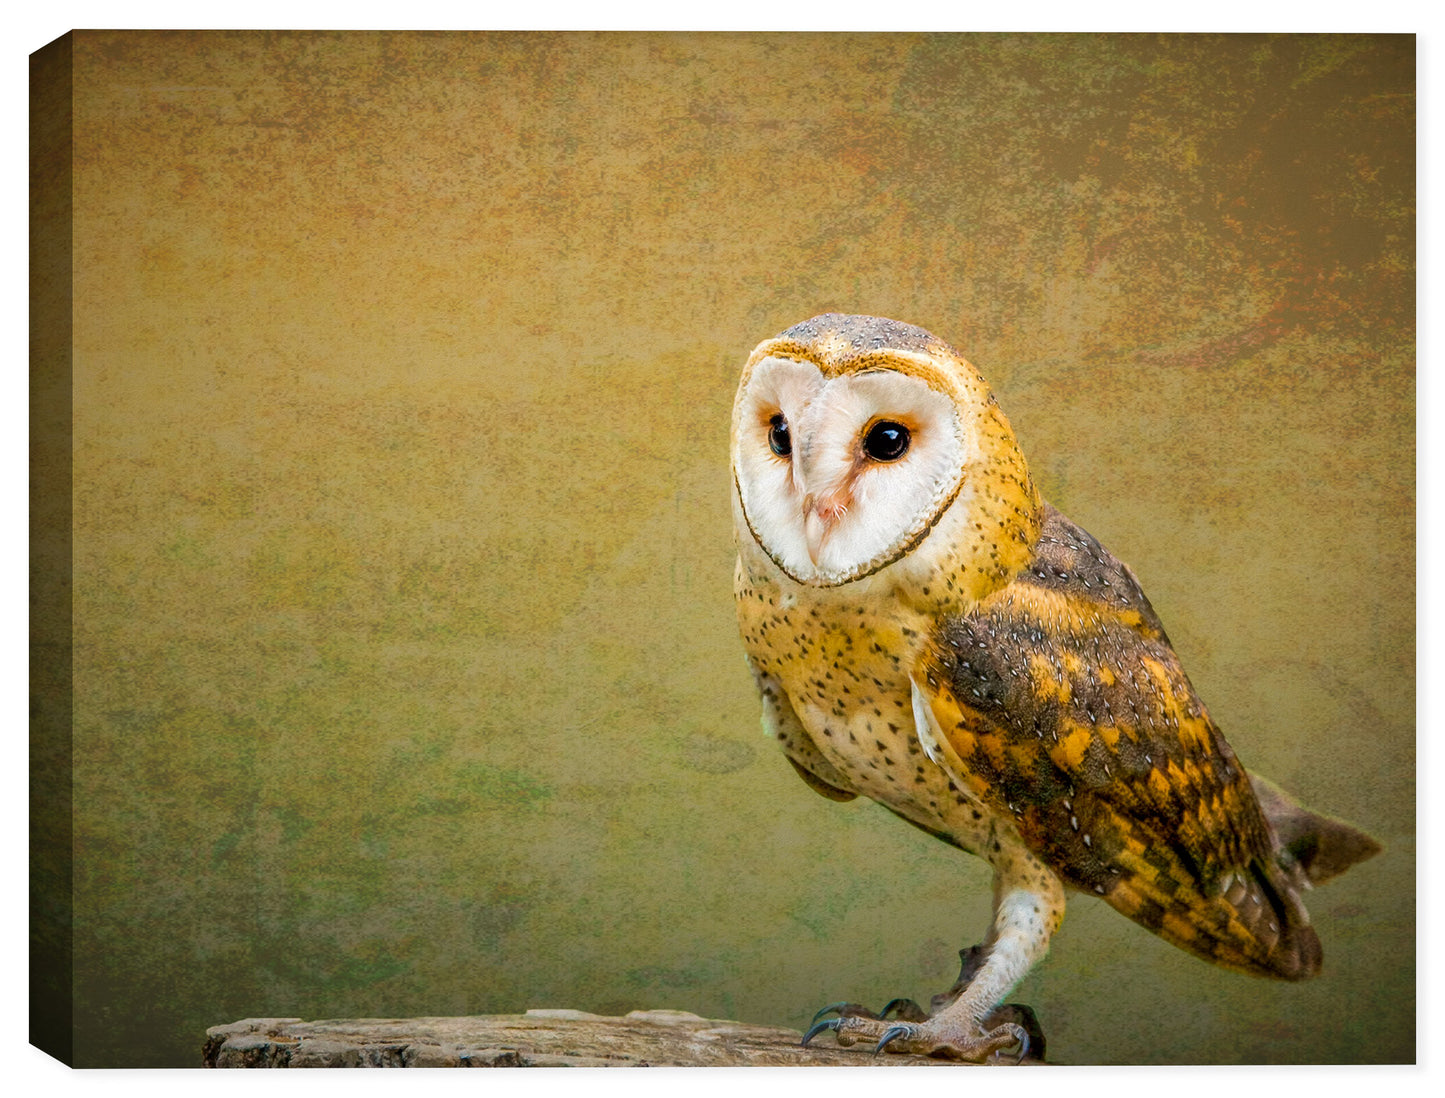 Barn Owl  - Digital Painting from Photograph